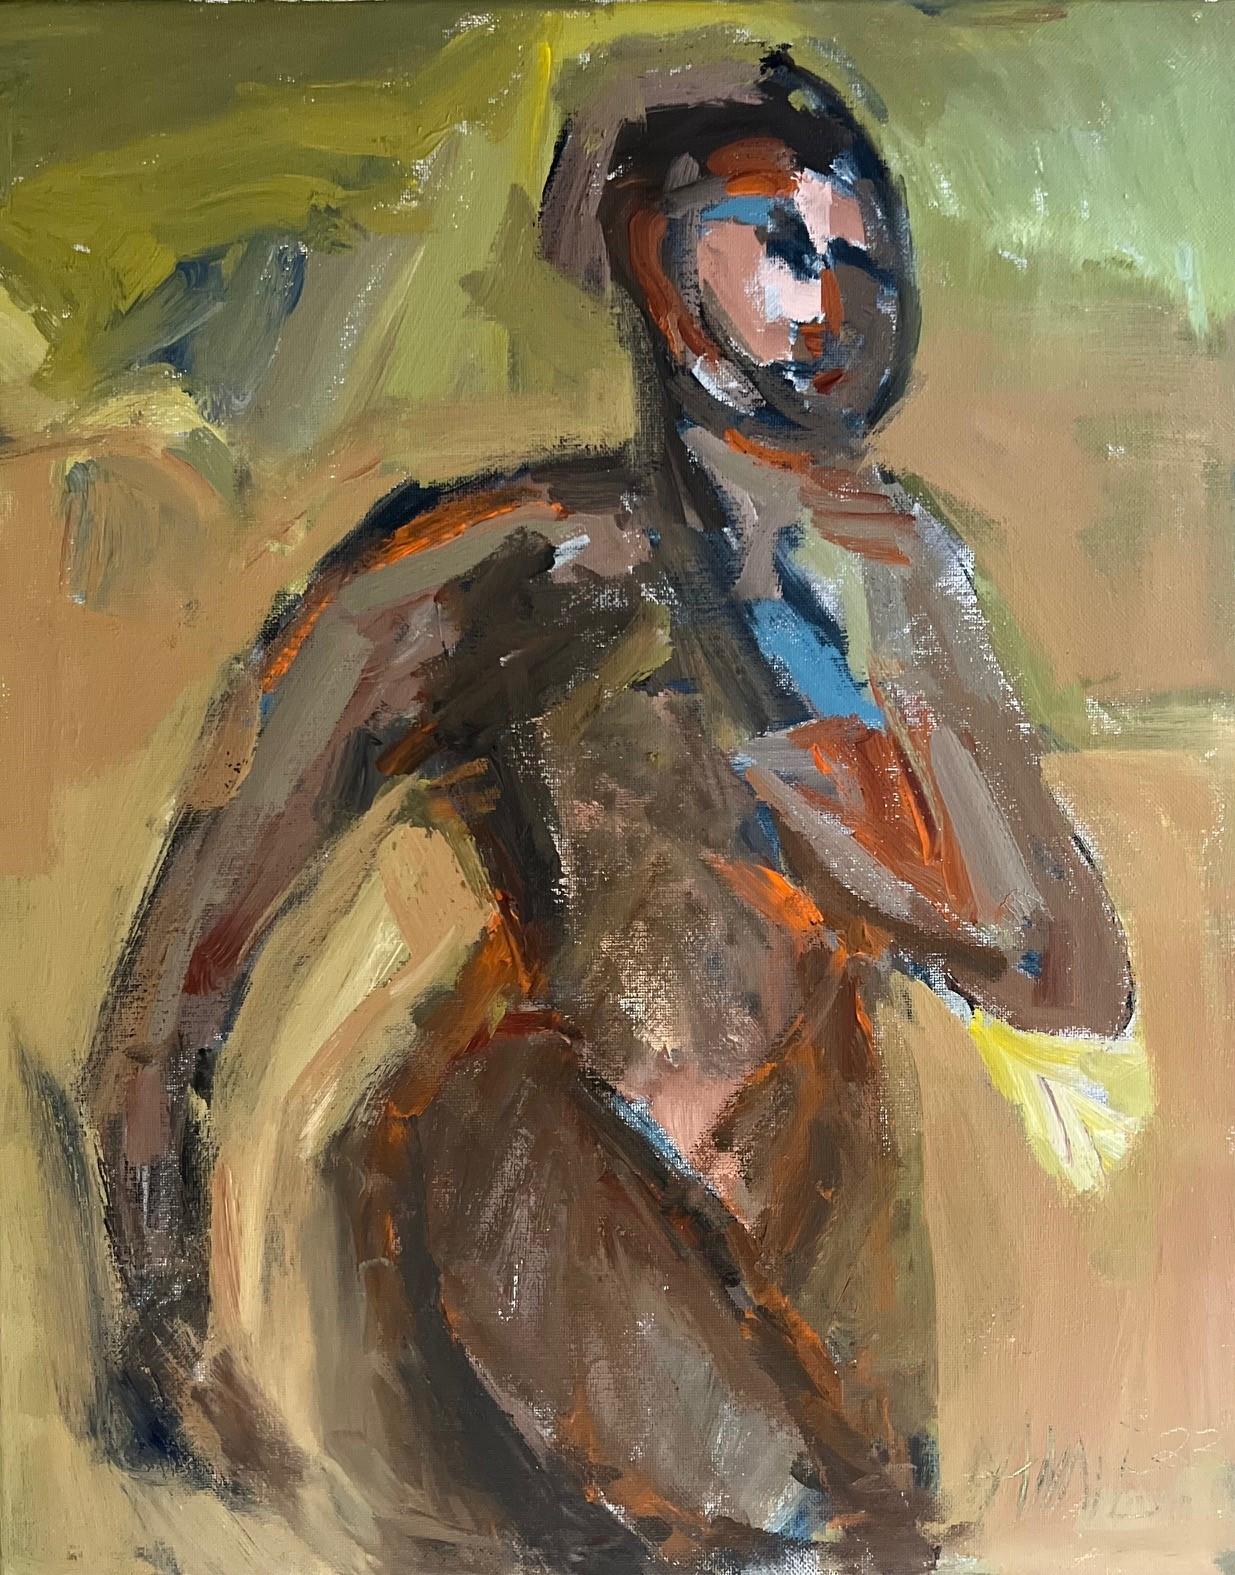 Primal Movement by Anne Darby Parker, Contemporary Cubist Figure Oil on Canvas